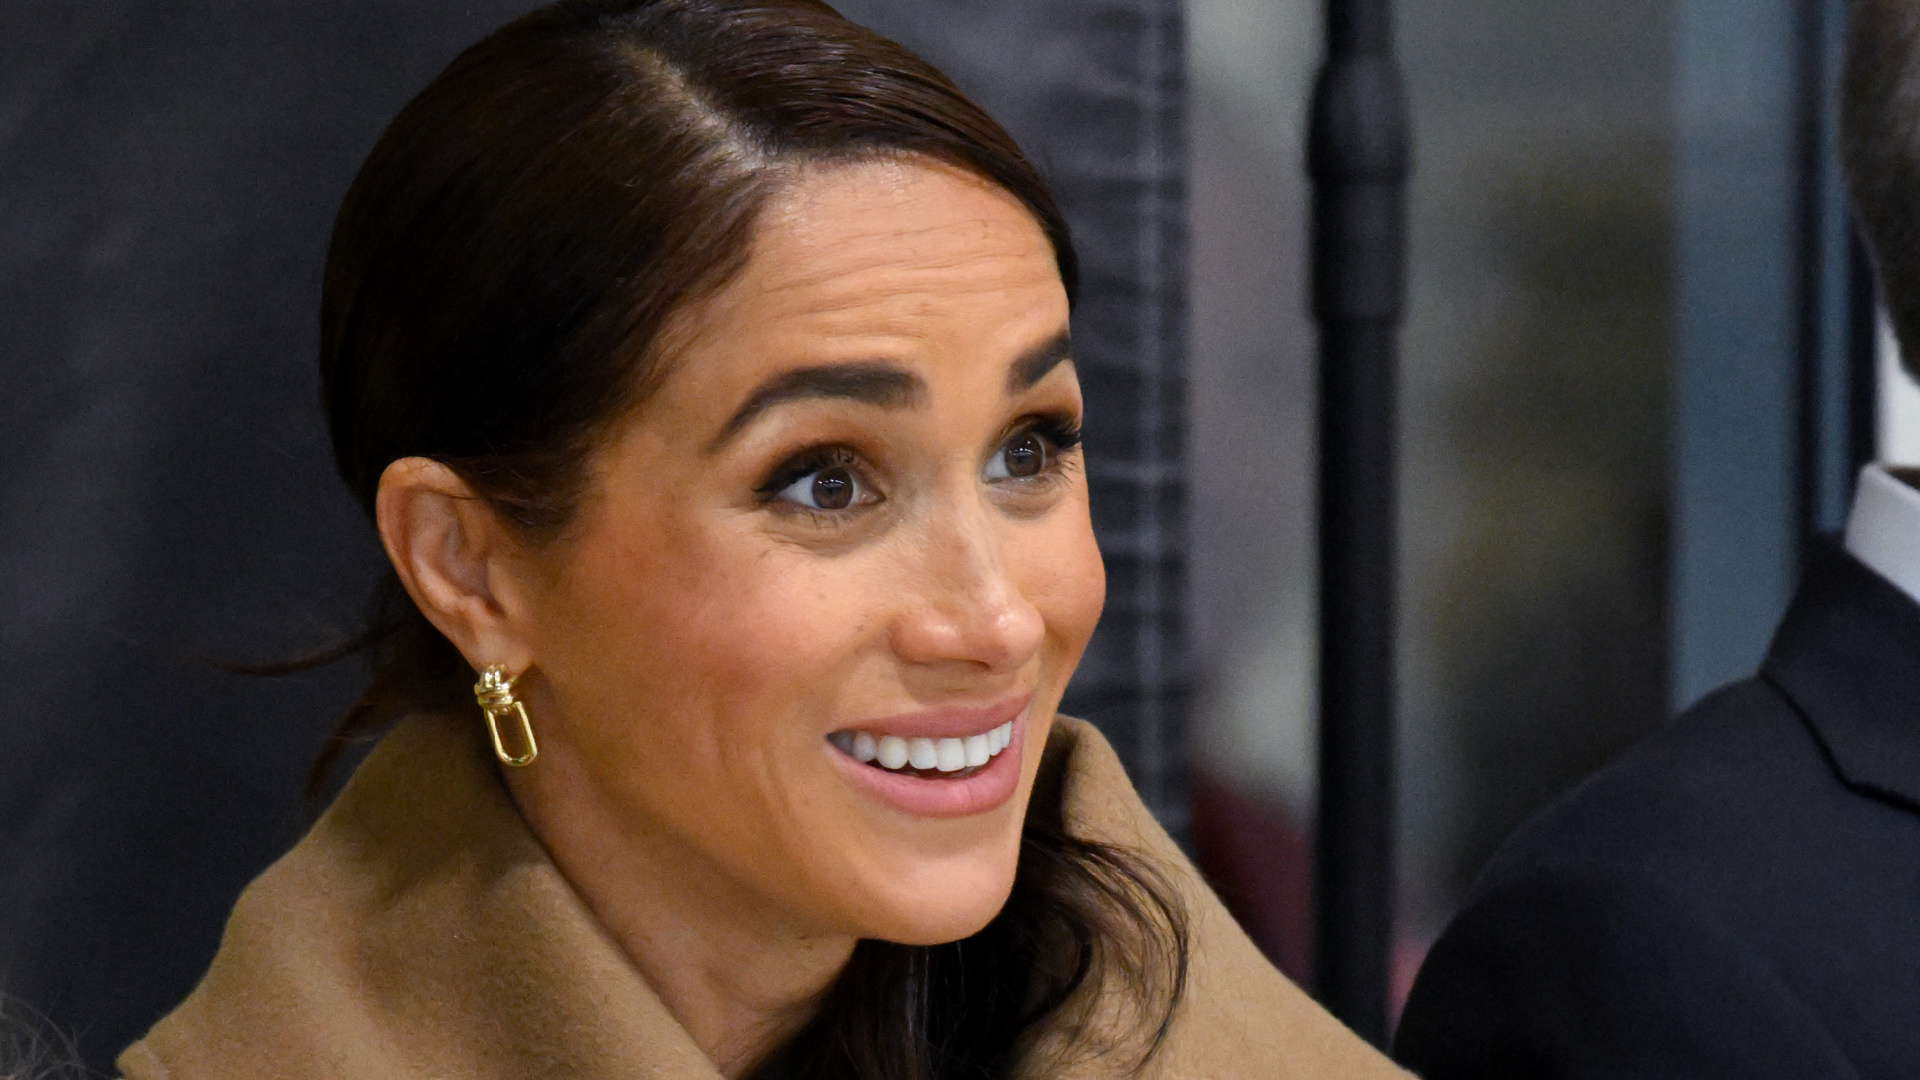 How much can Meghan Markle make from her new 'American Riviera Orchard' brand?